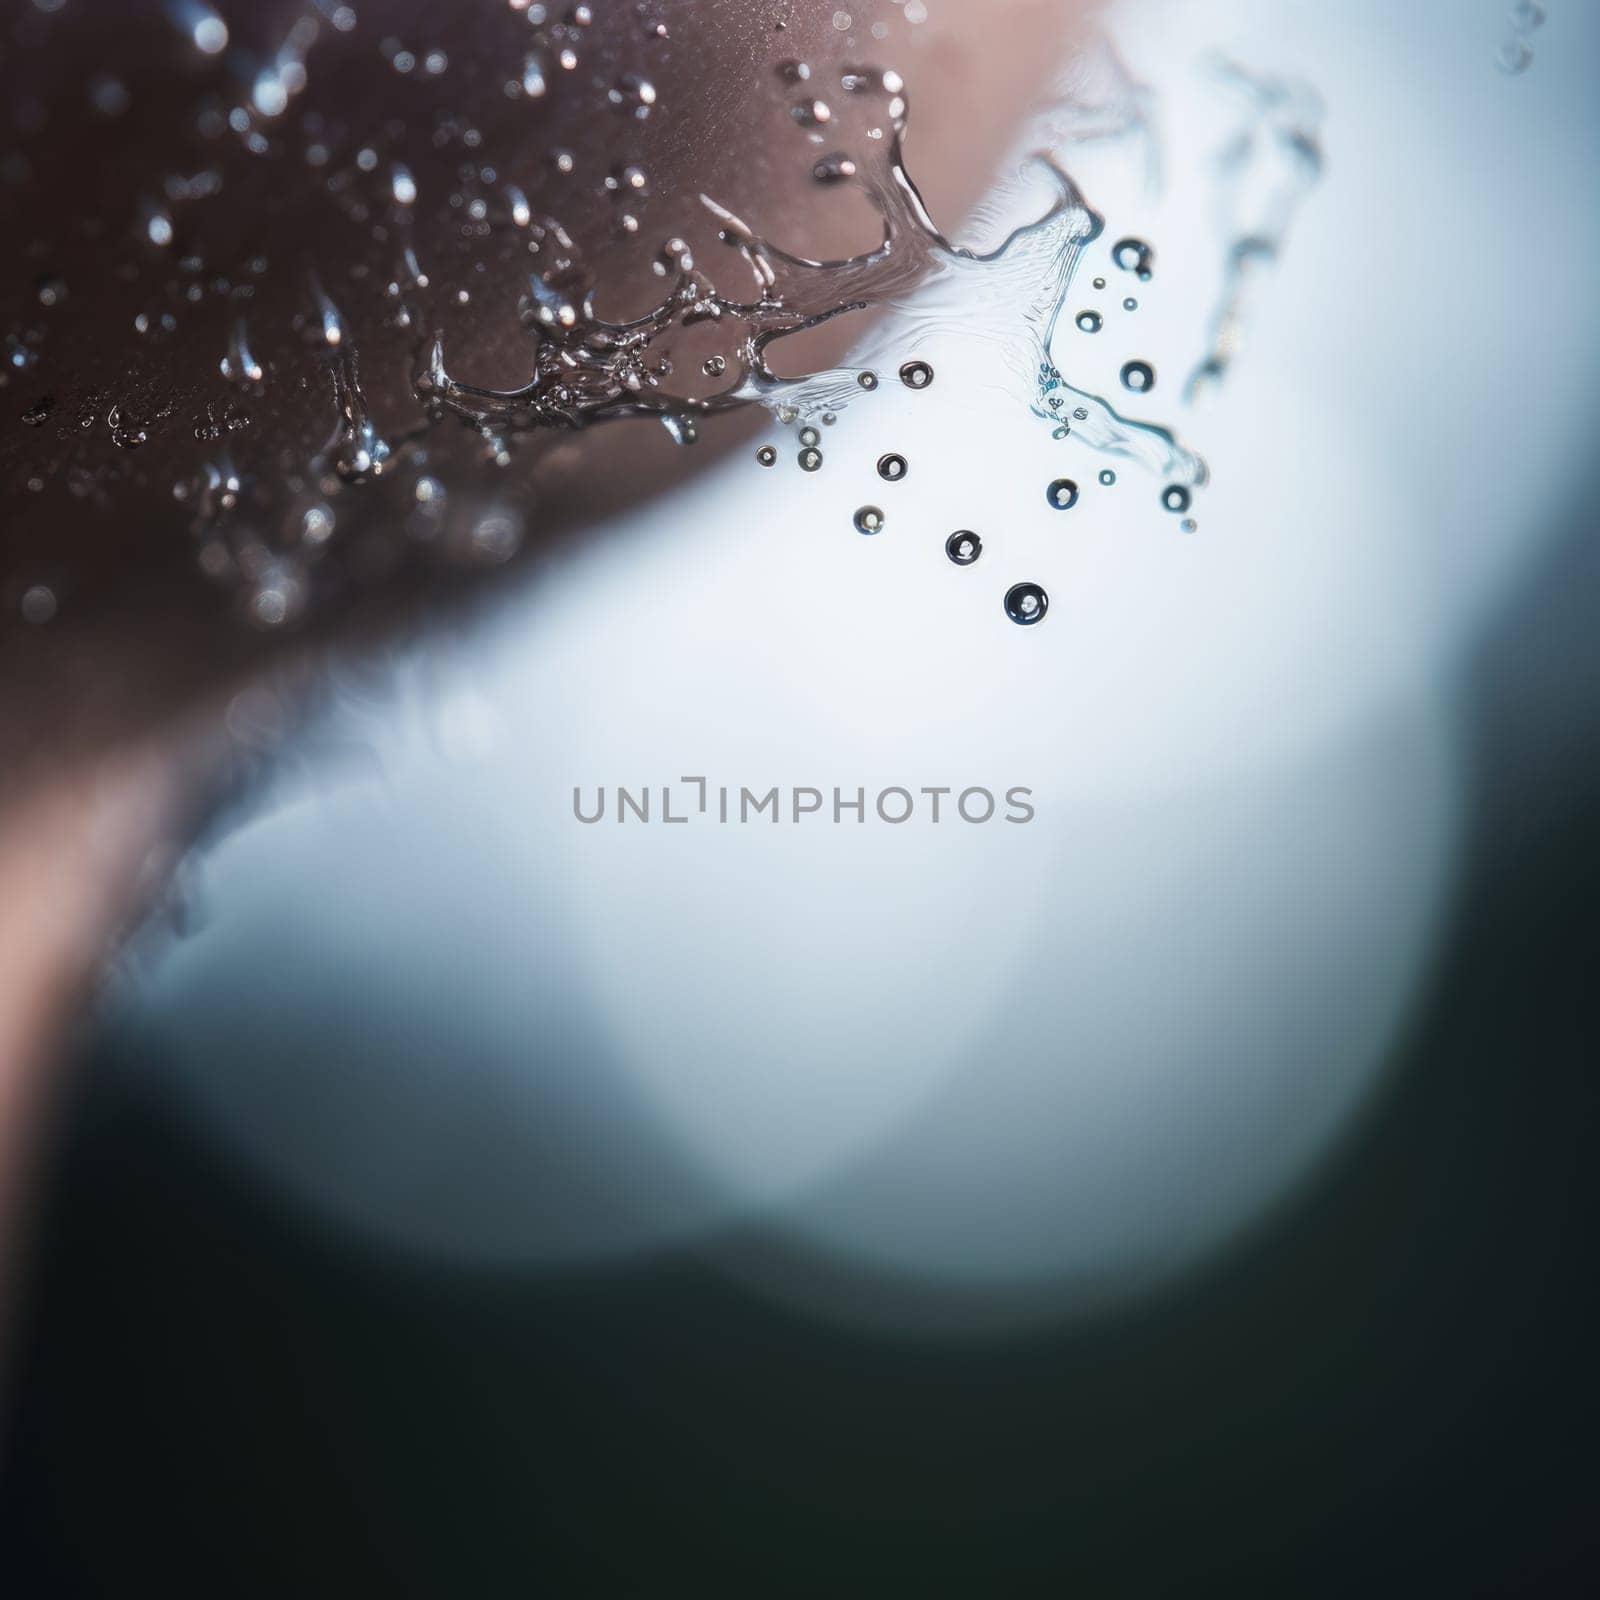 A close up of a man's face with water droplets, AI by starush